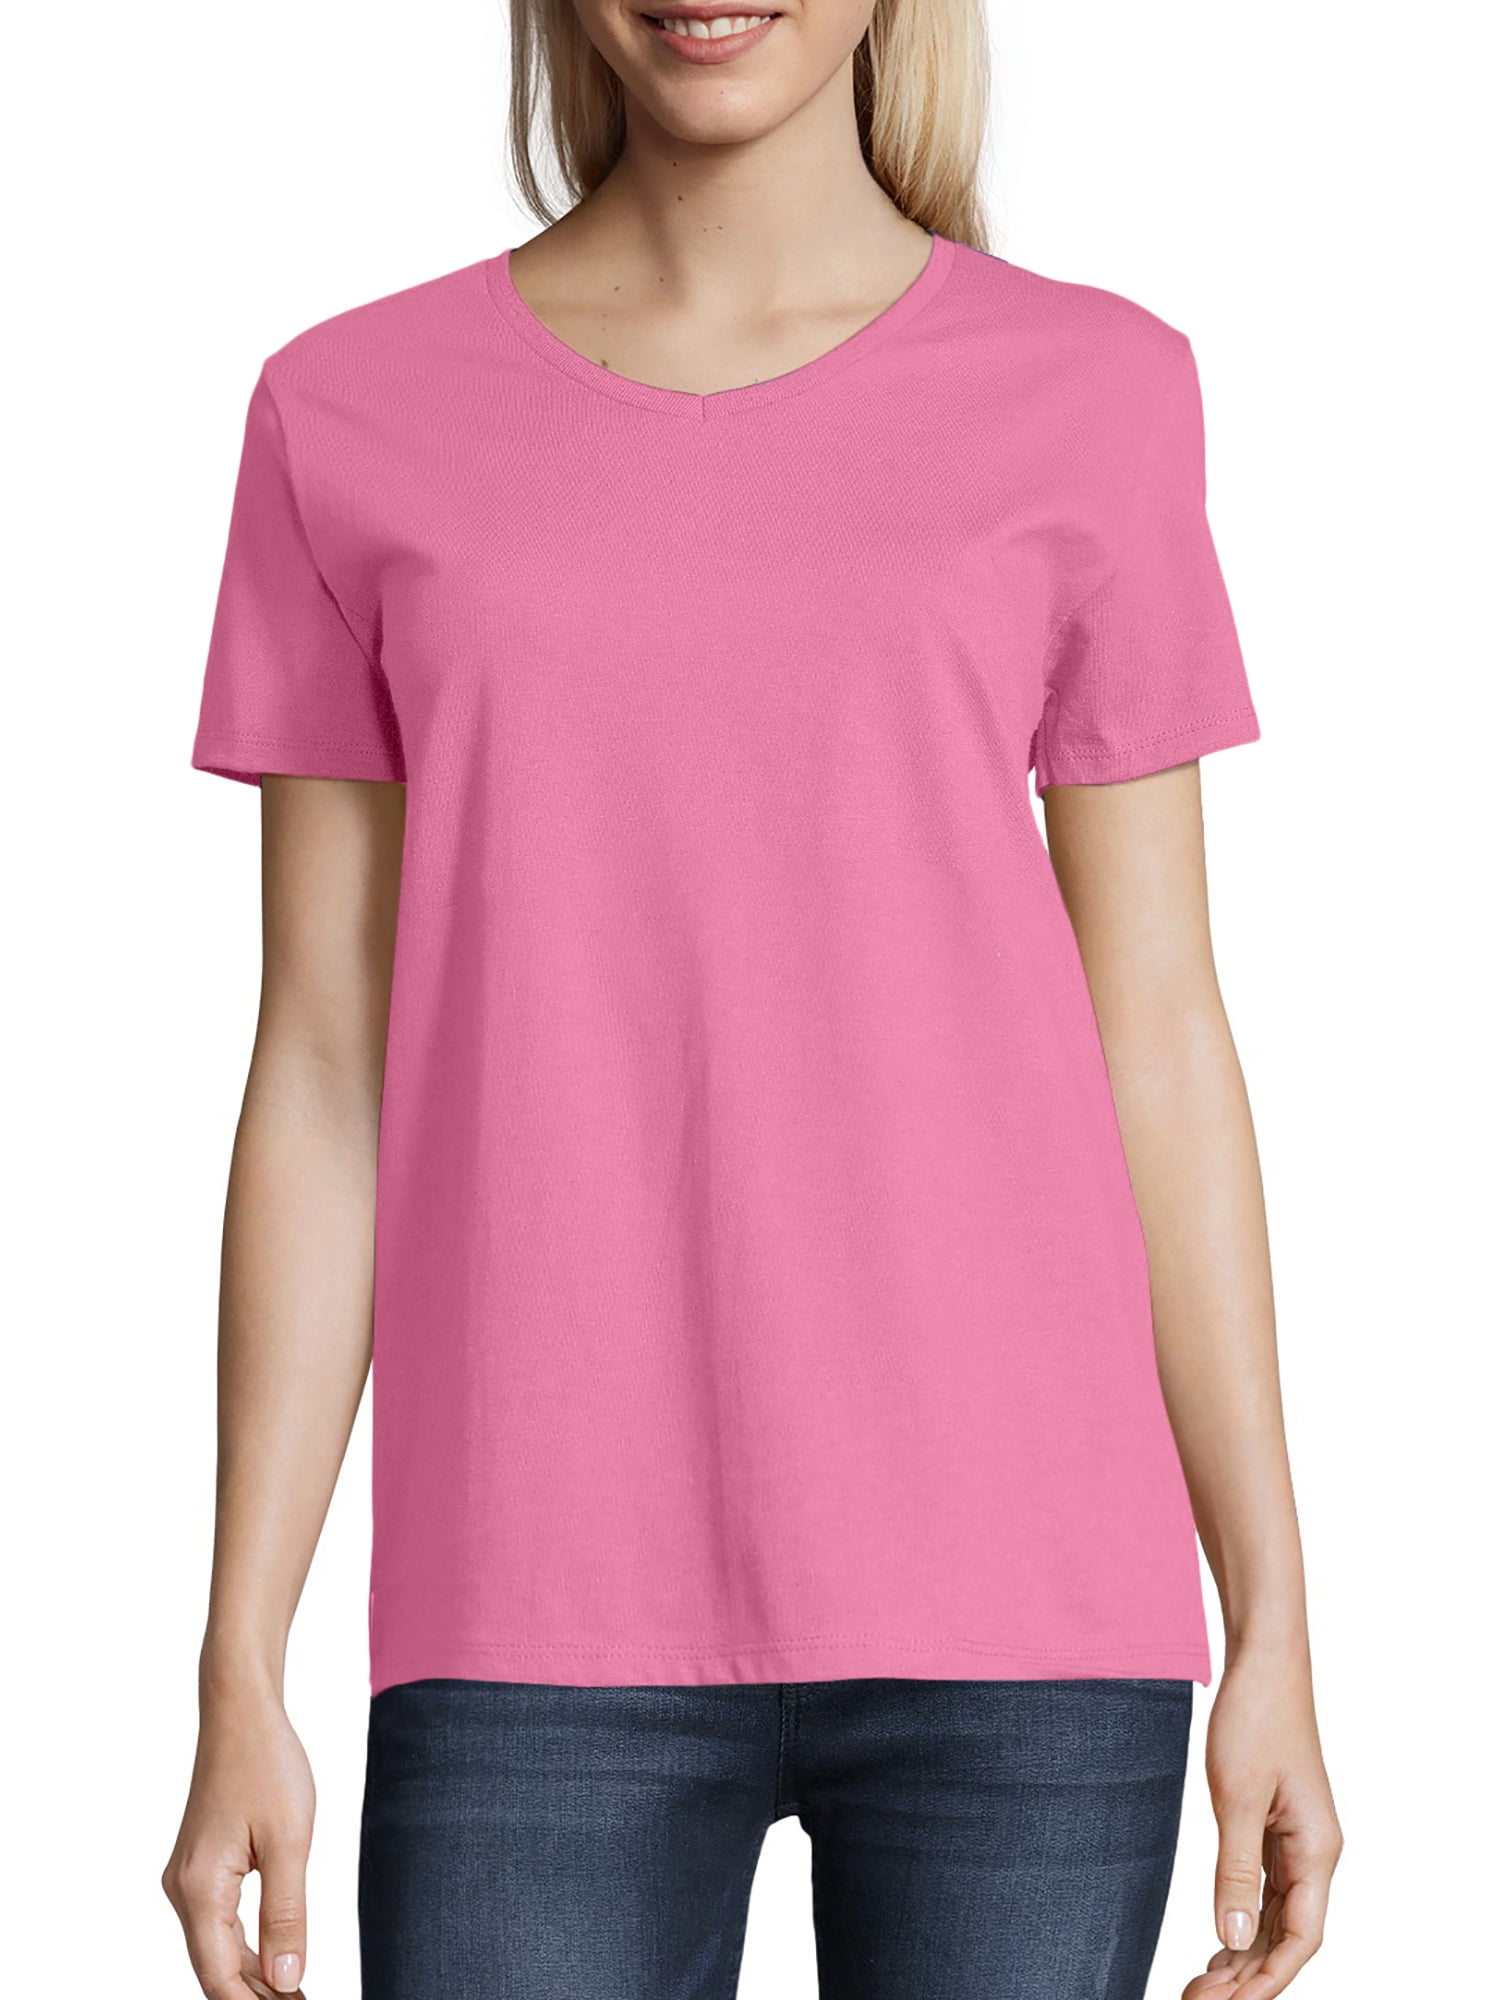 Hanes - Hanes Women's Relaxed Fit Tagless ComfortSoft Short Sleeve V ...